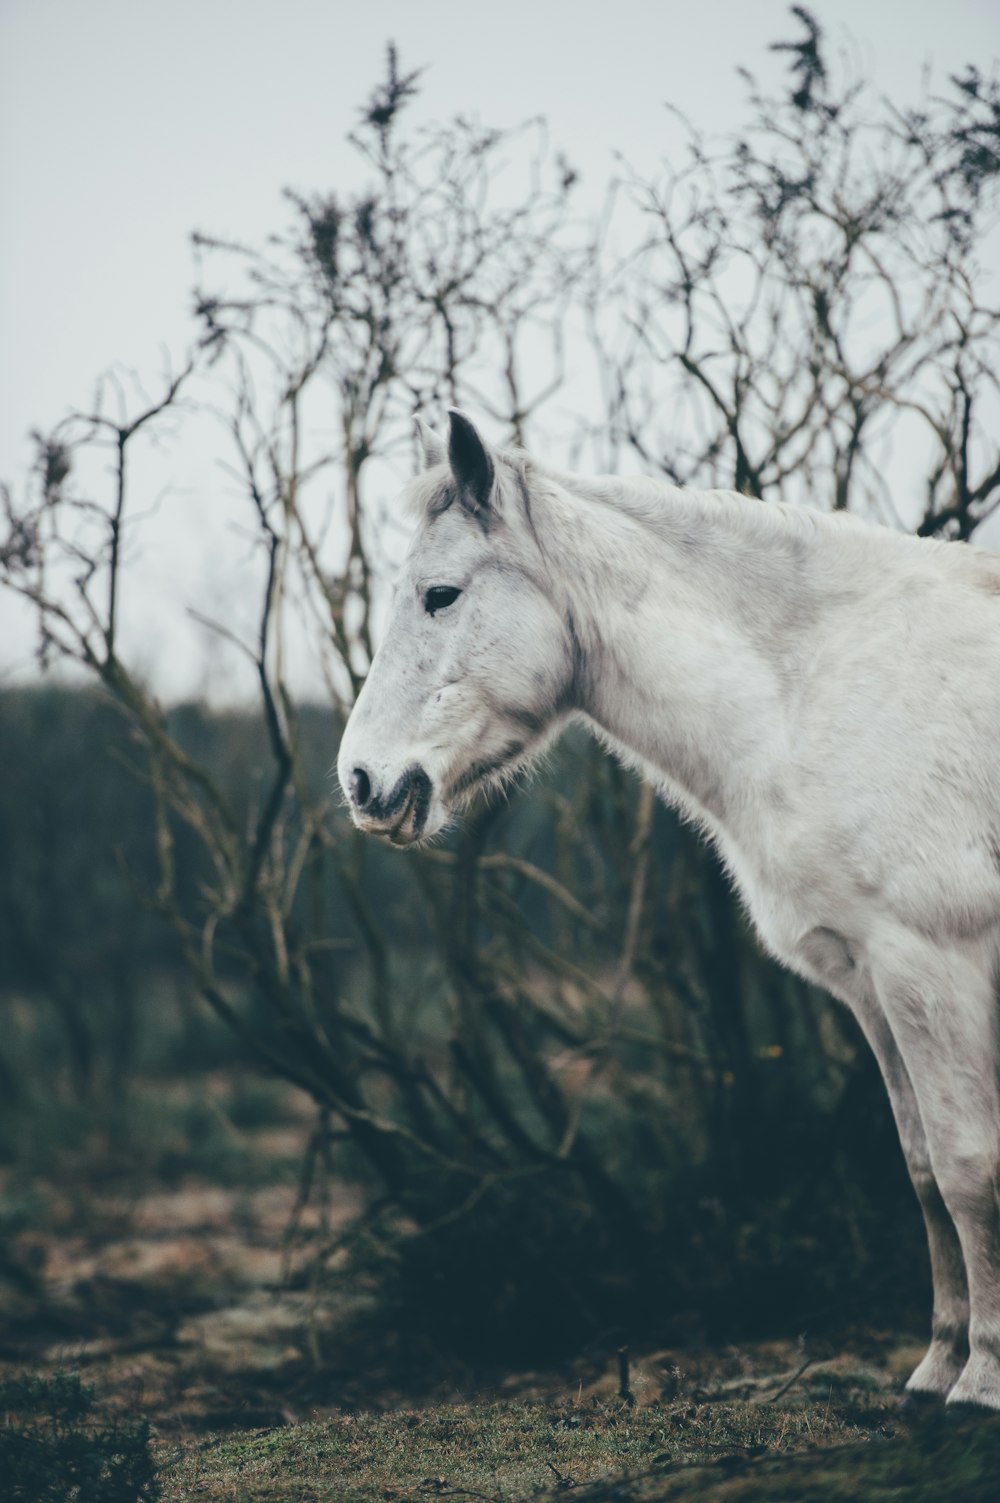 white horse surrounded by withered trees